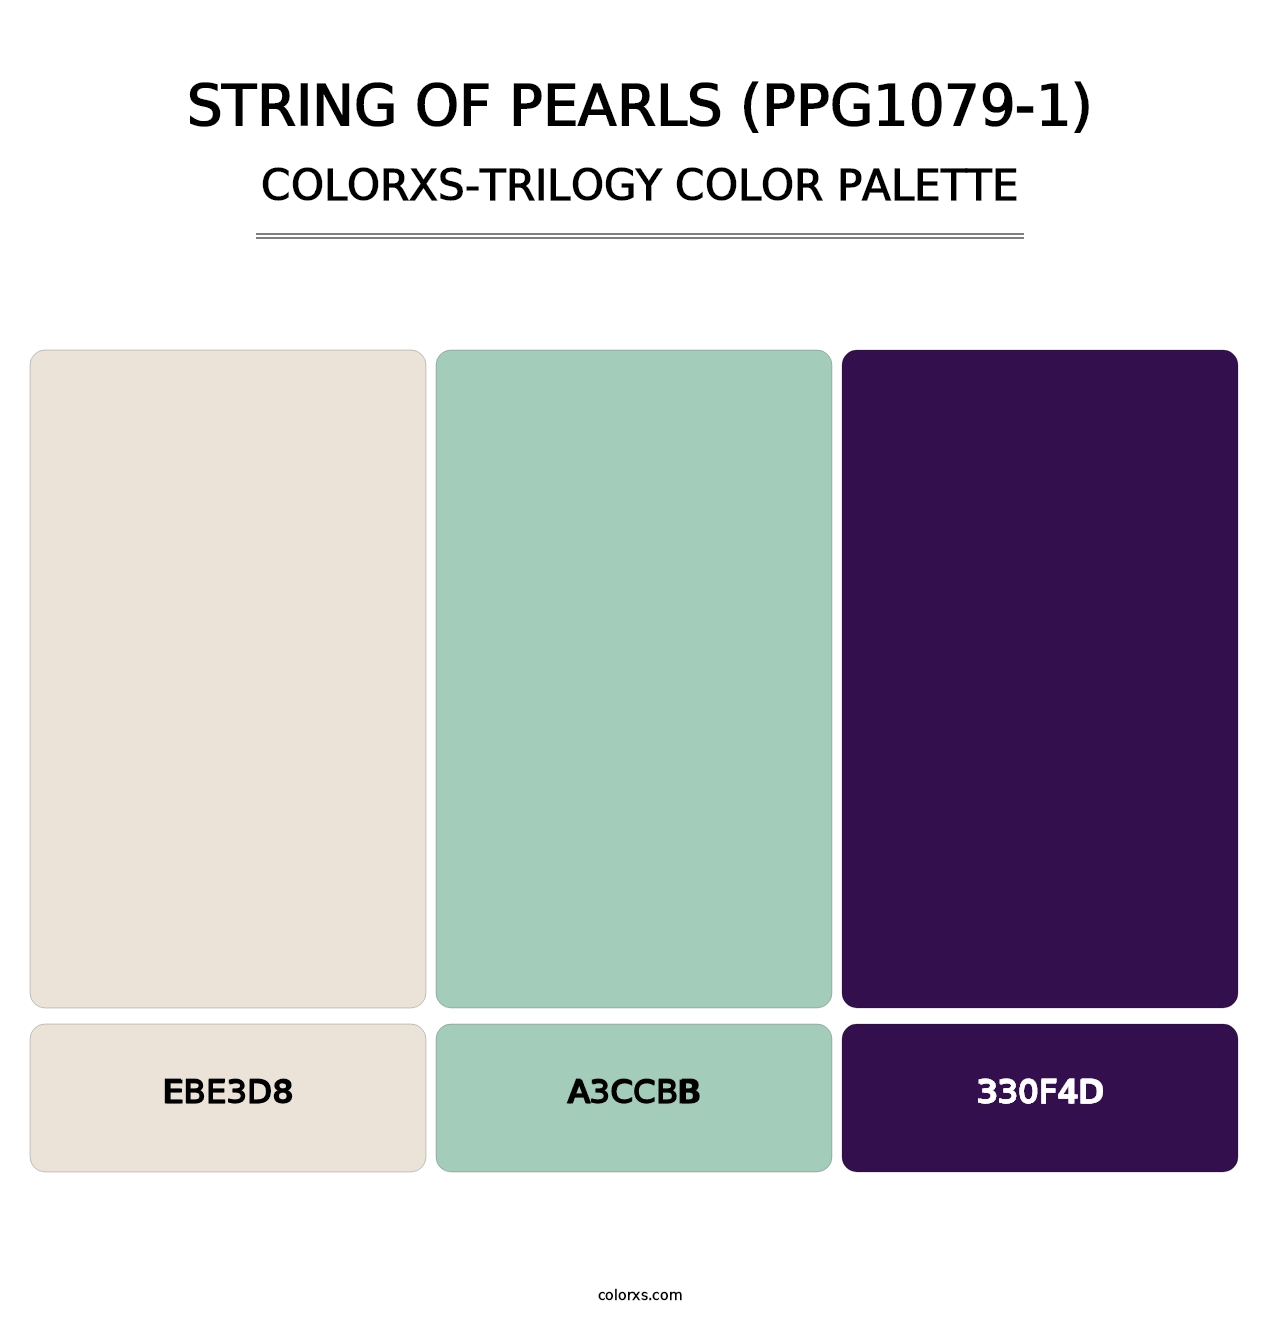 String Of Pearls (PPG1079-1) - Colorxs Trilogy Palette